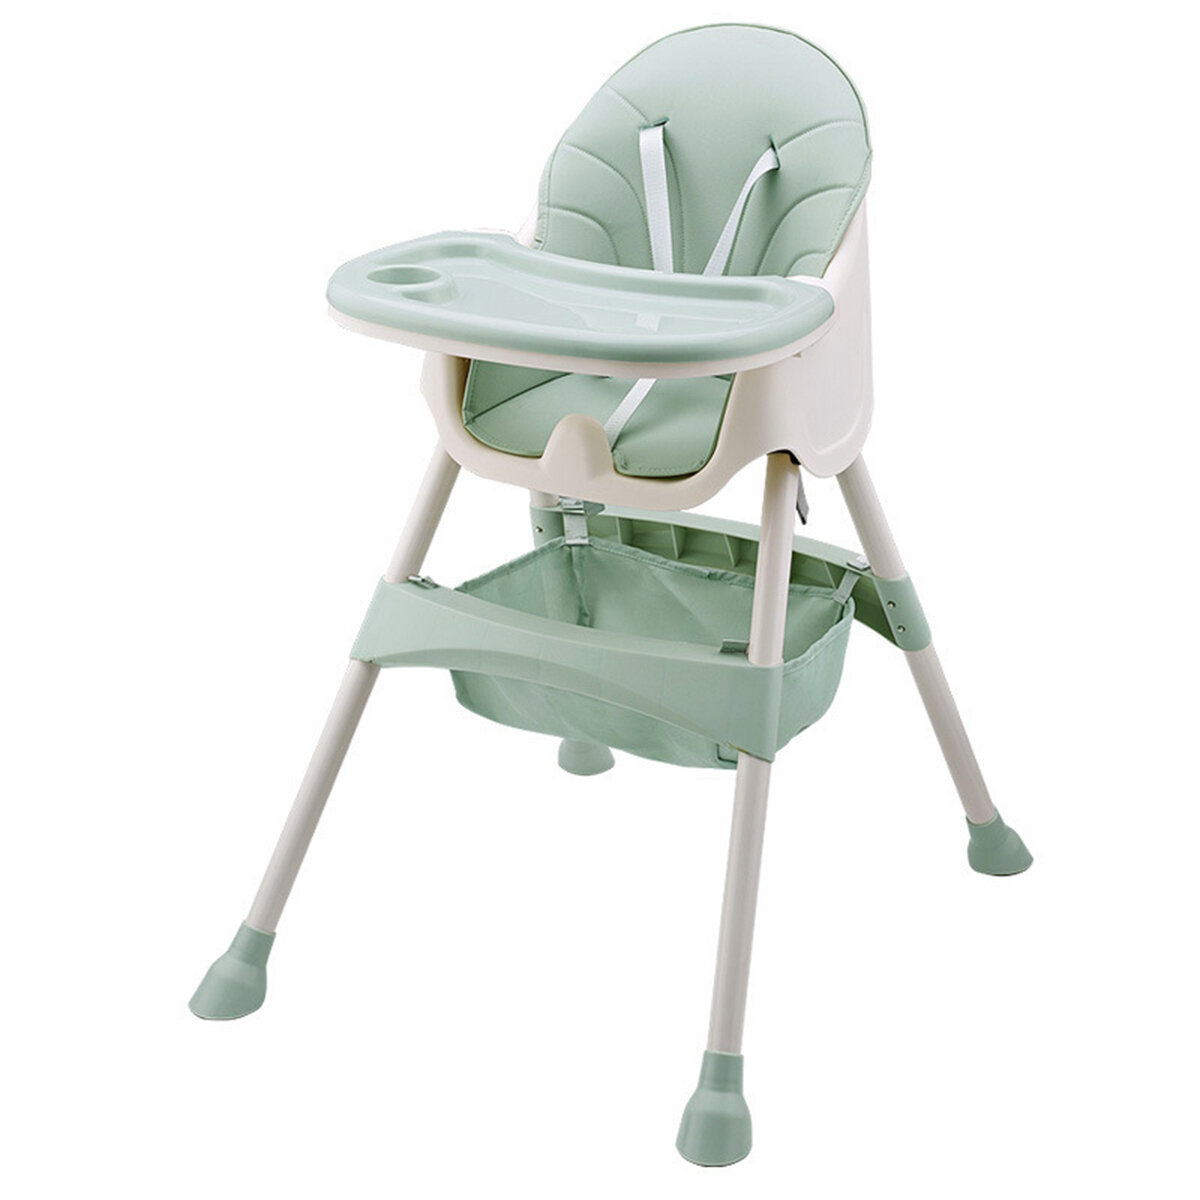 Feeding Infant Dining Chair Adjustable Toddler Portable Multi-function Baby Seat Home Indoor Highchair for Childrens